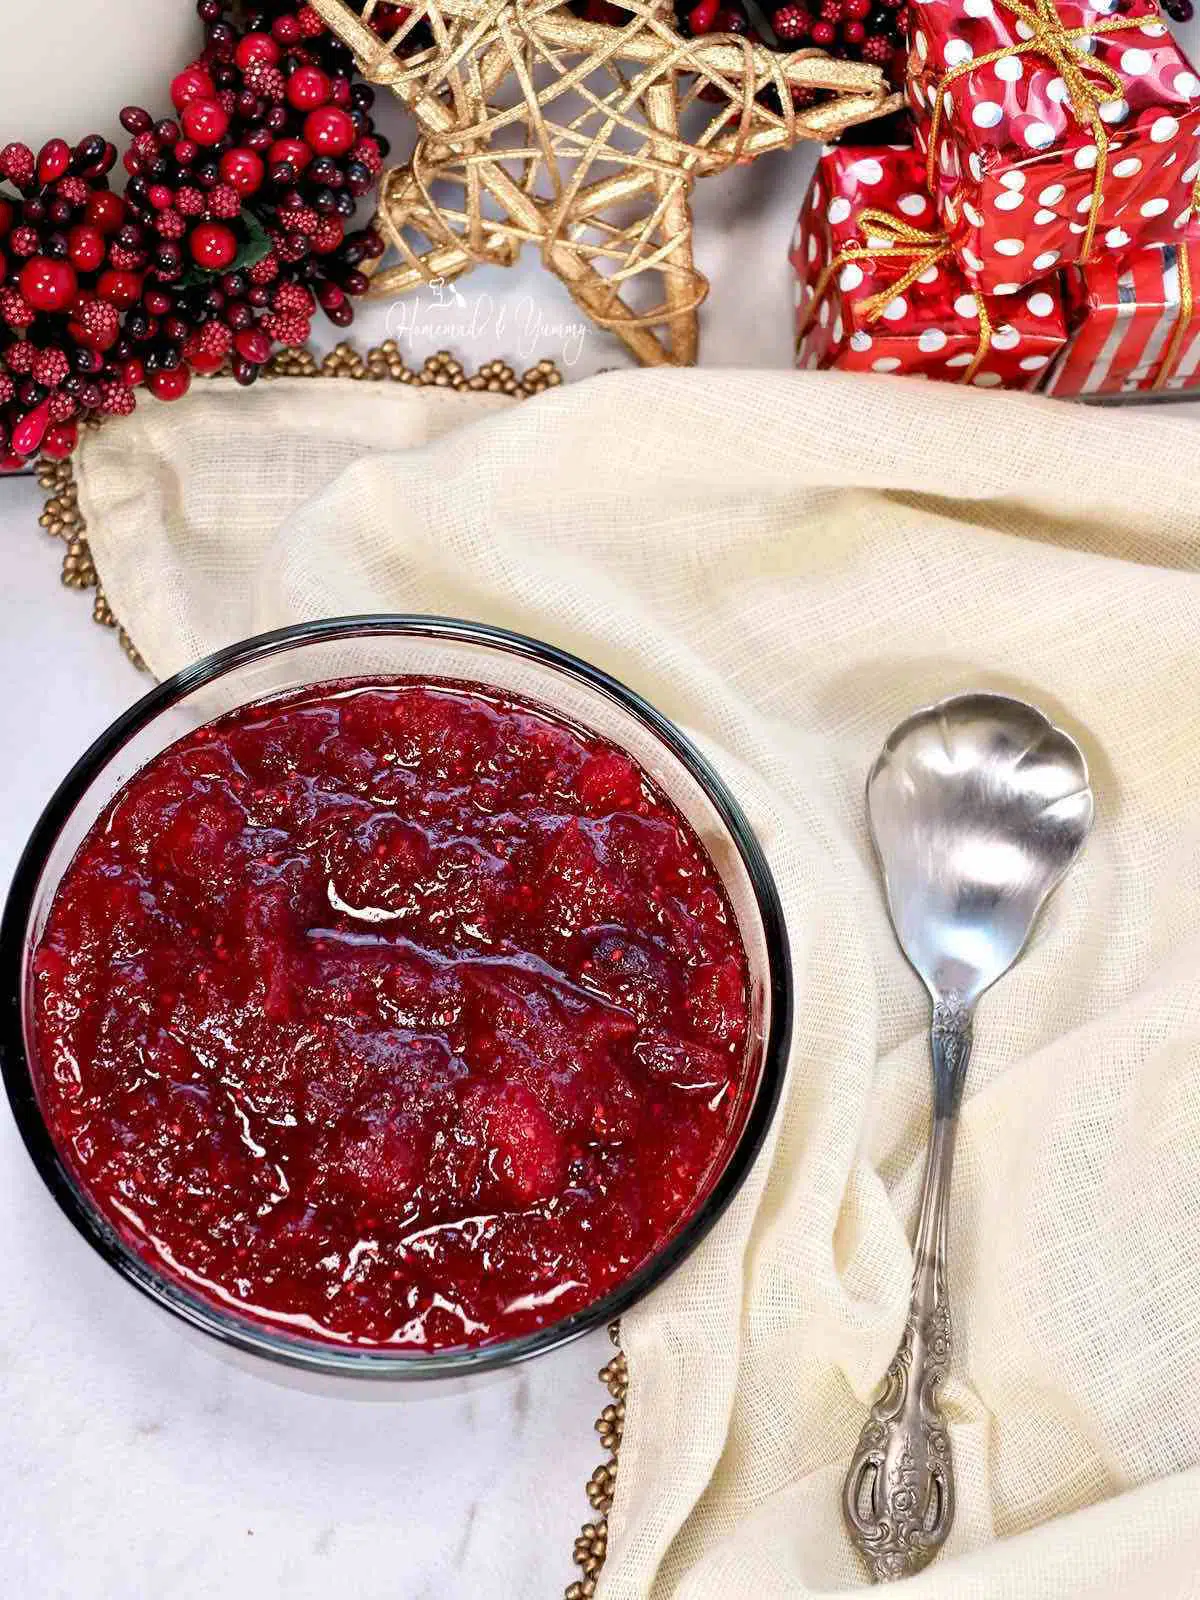 The ultimate cranberry sauce made with maple syrup and bourbon.